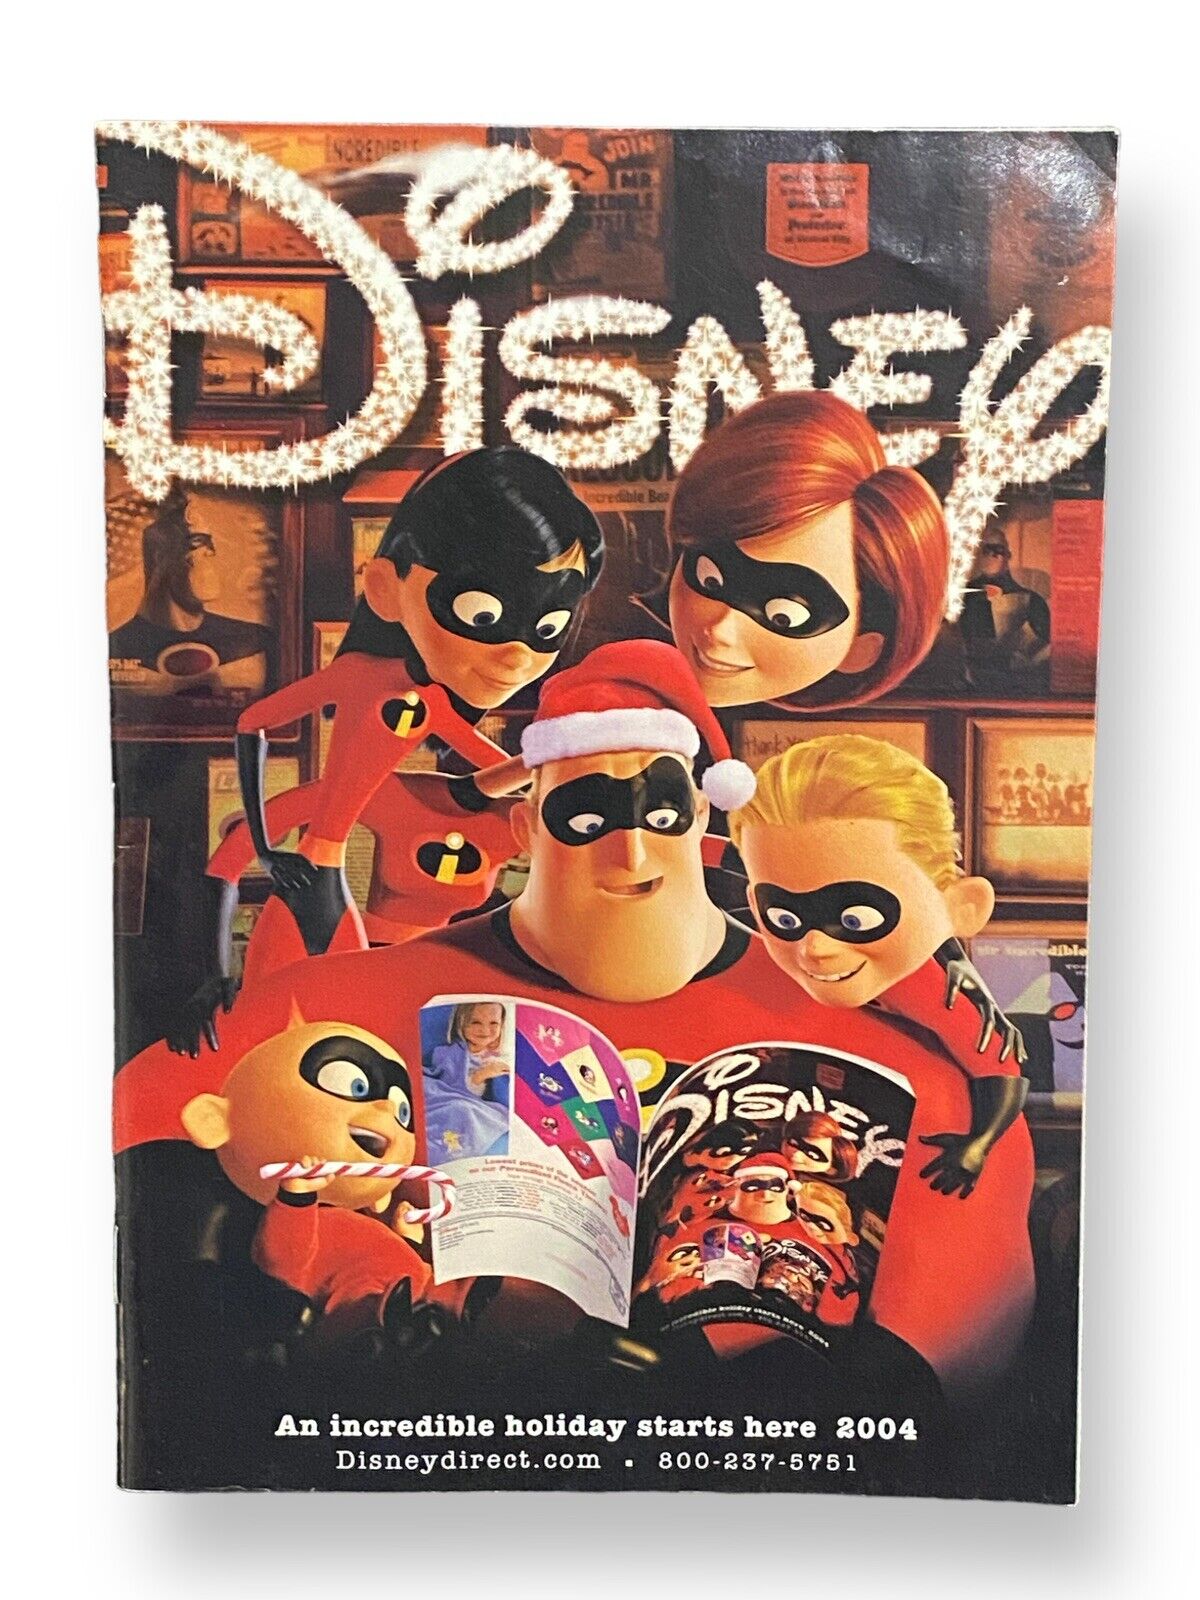 Disney Store Catalog Booklet 2004 Pixar The Incredibles Christmas Holiday Promo